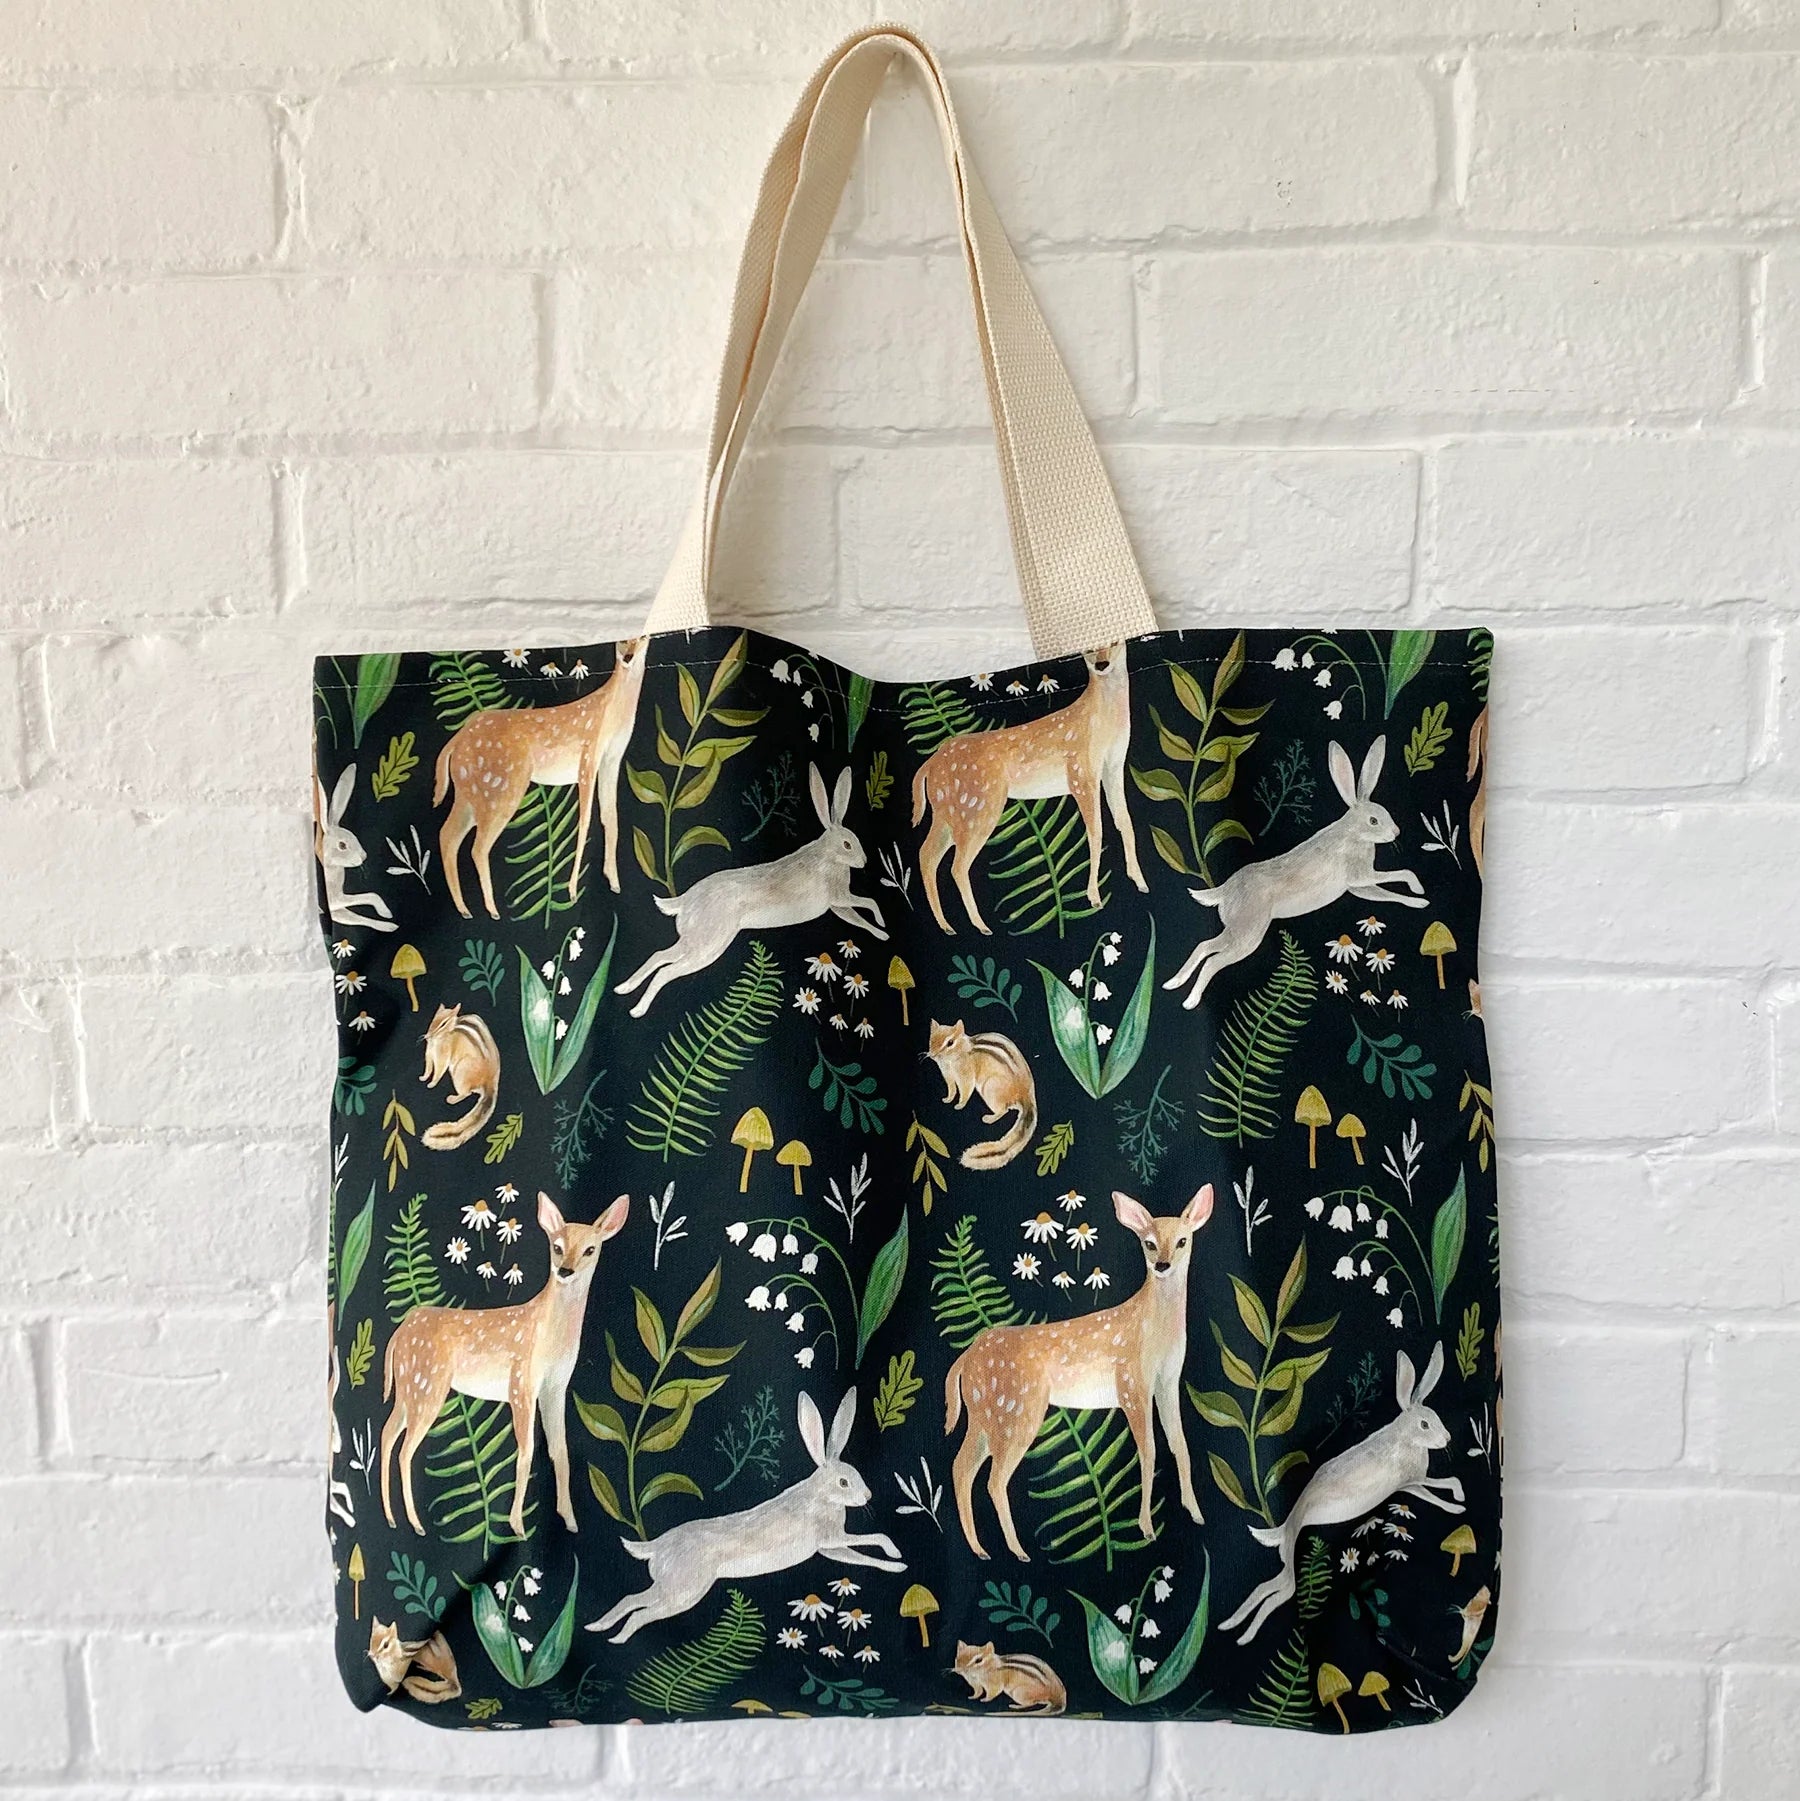 Emilie Simpson Art and Design | Tote Bags